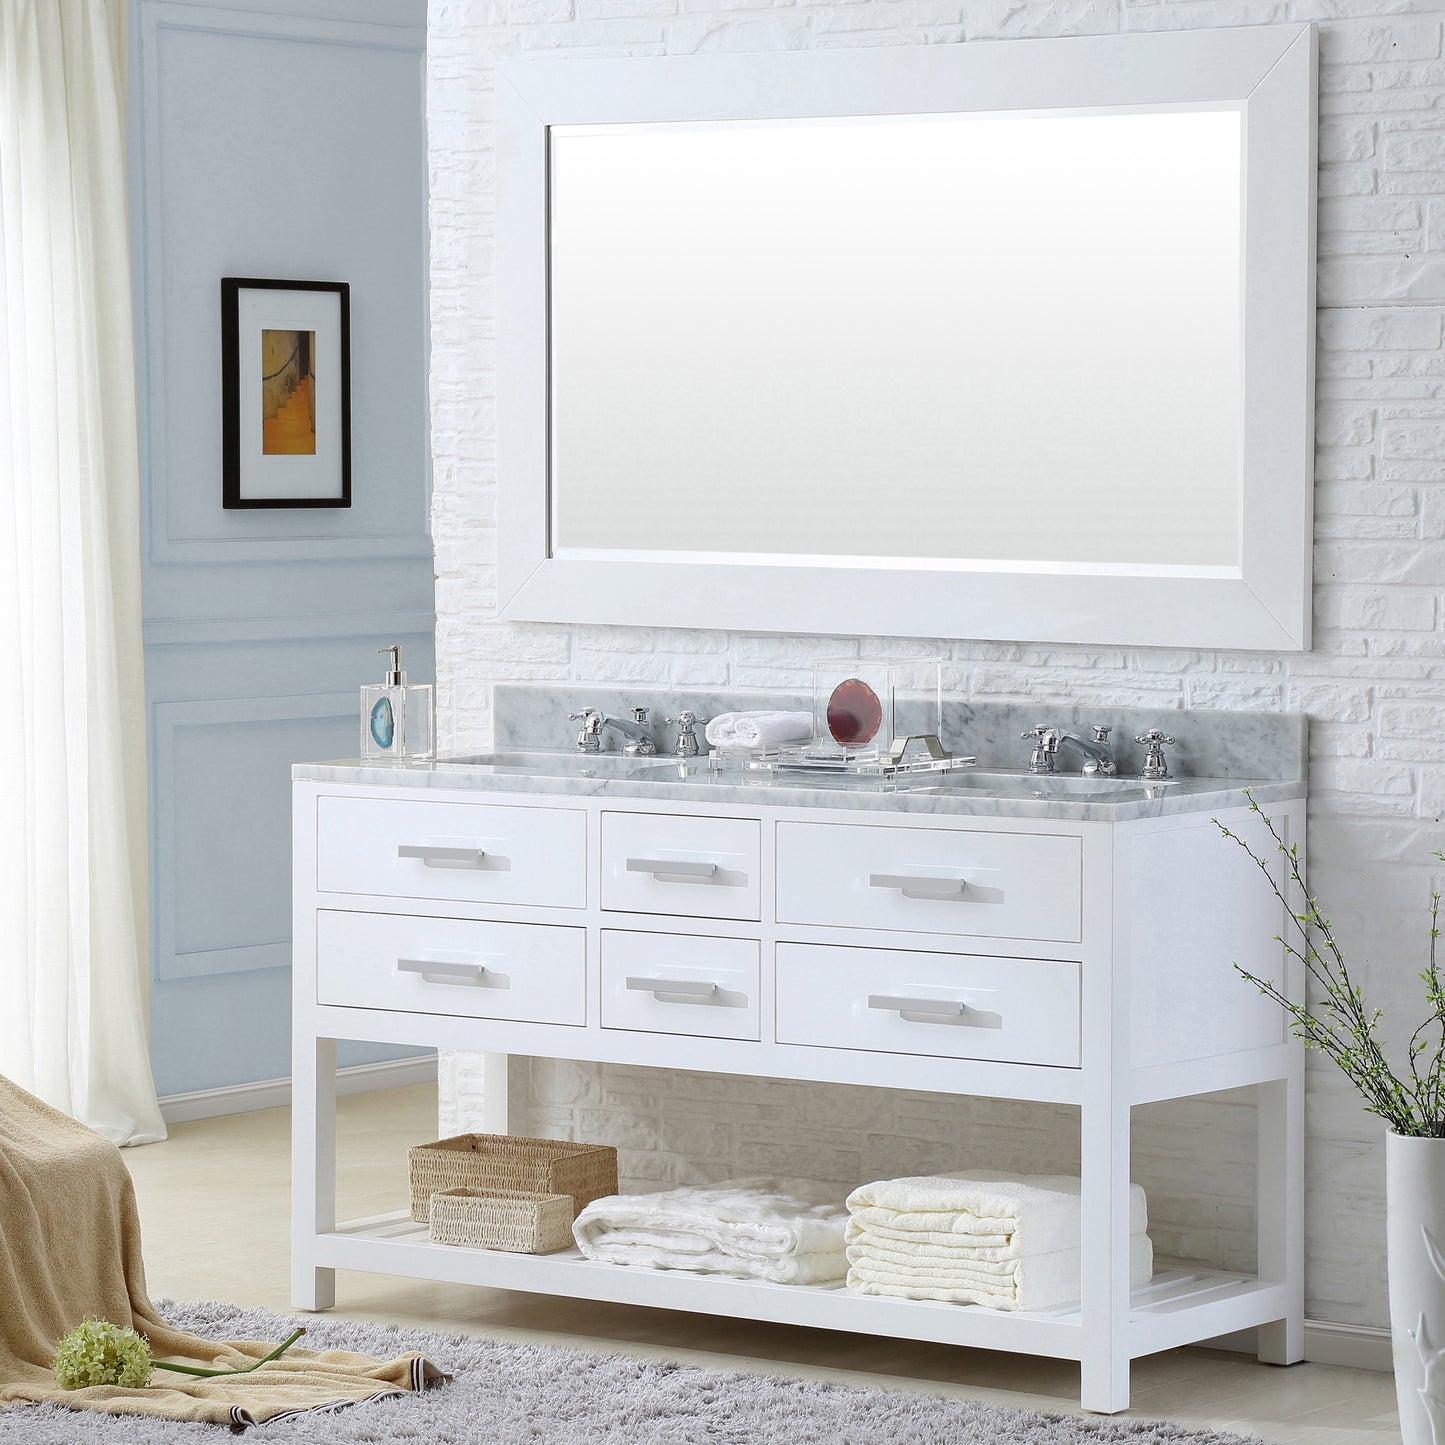 Water Creation 60 Inch Double Sink Bathroom Vanity With Matching Framed Mirror From The Madalyn Collection - Luxe Bathroom Vanities